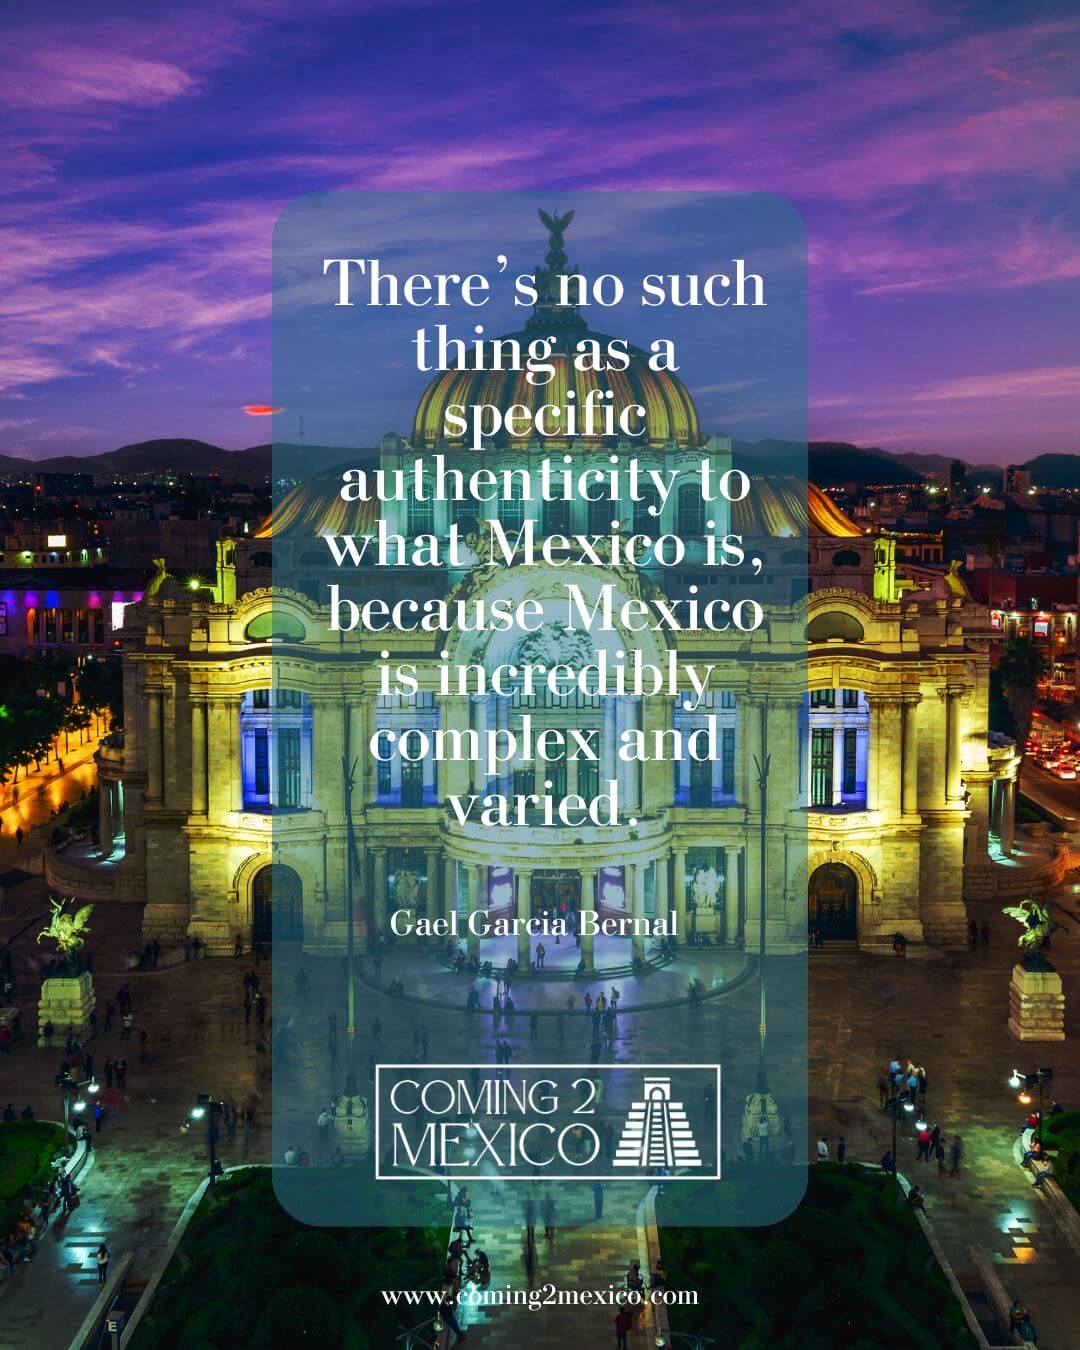 “There’s no such thing as a specific authenticity to what Mexico is, because Mexico is incredibly complex and varied.” - Gael Garcia Bernal